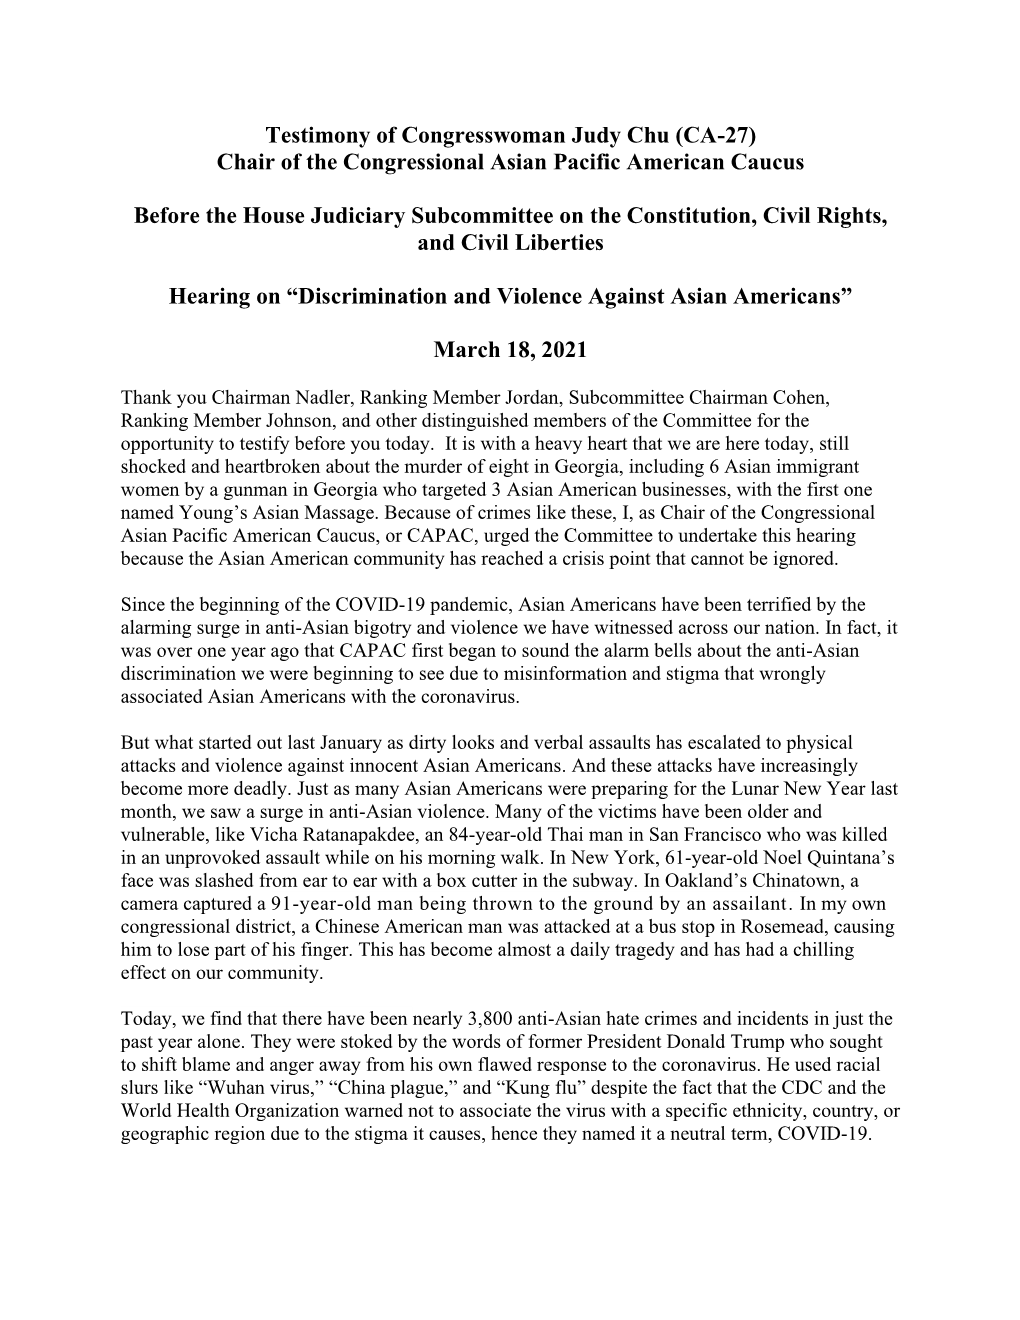 Testimony of Congresswoman Judy Chu (CA-27) Chair of the Congressional Asian Pacific American Caucus